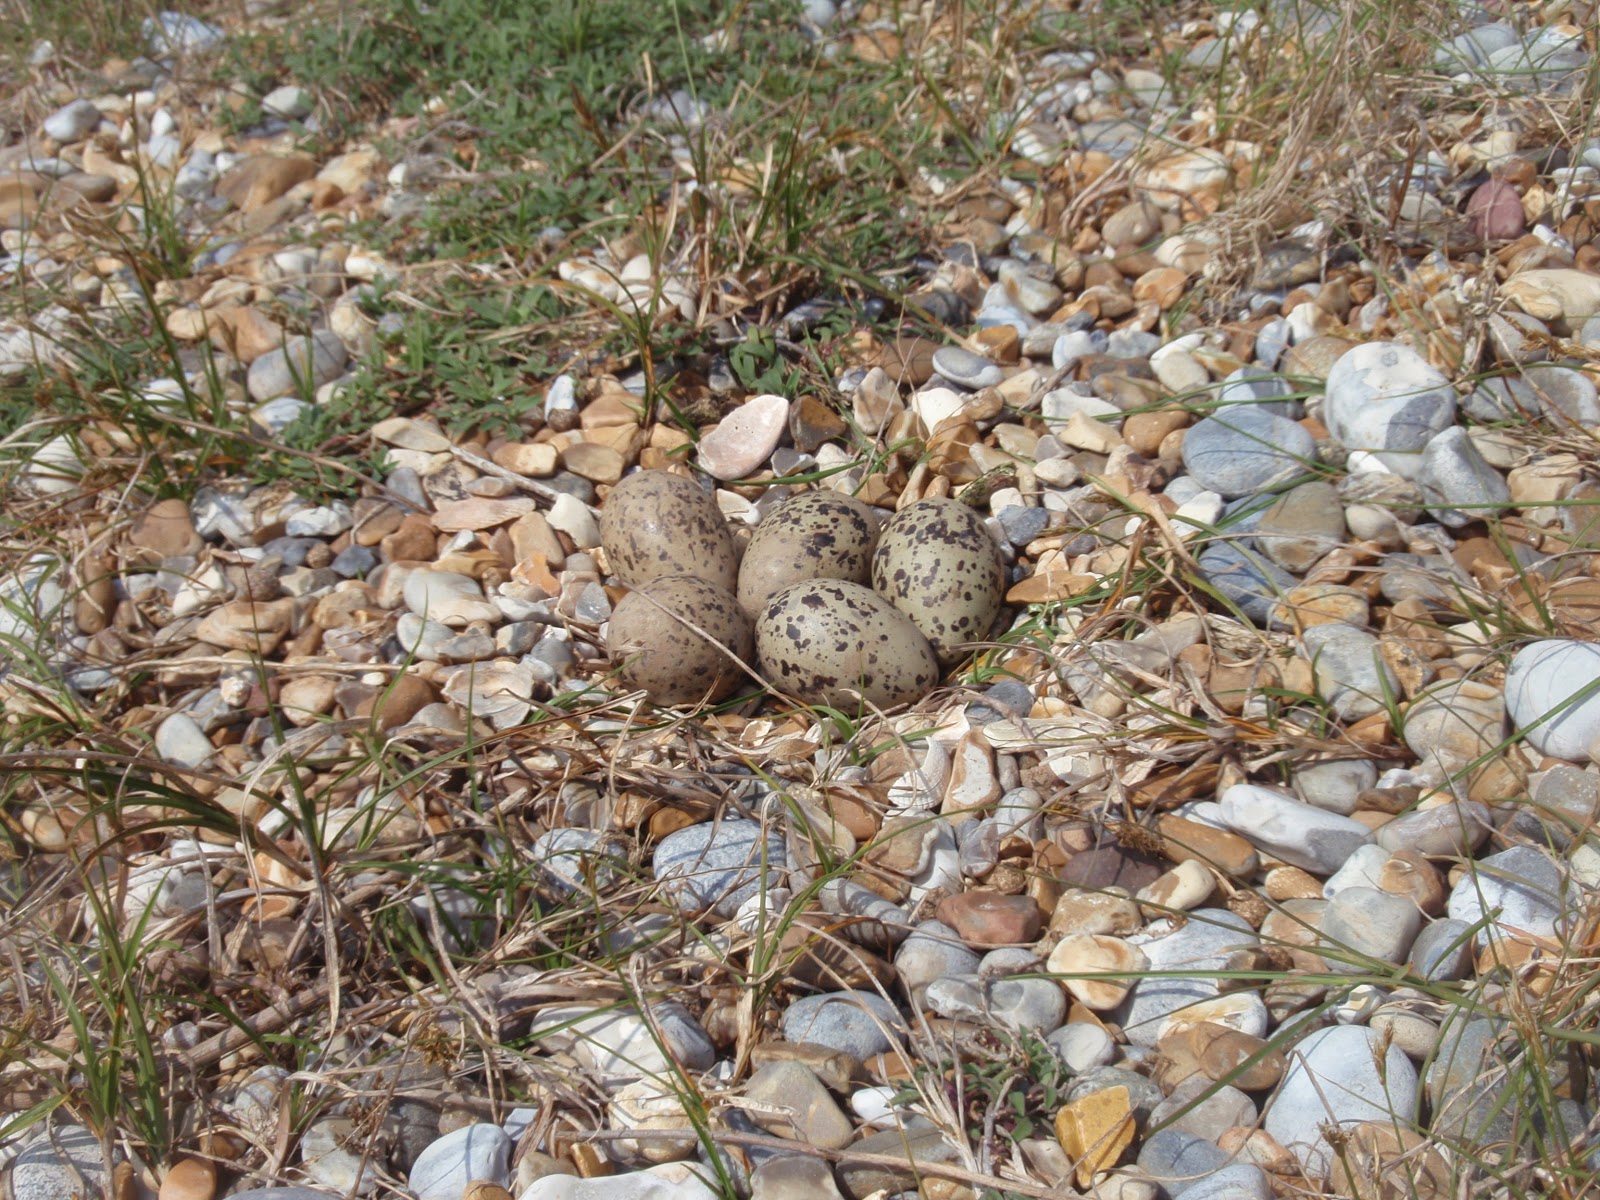 eggs and nest